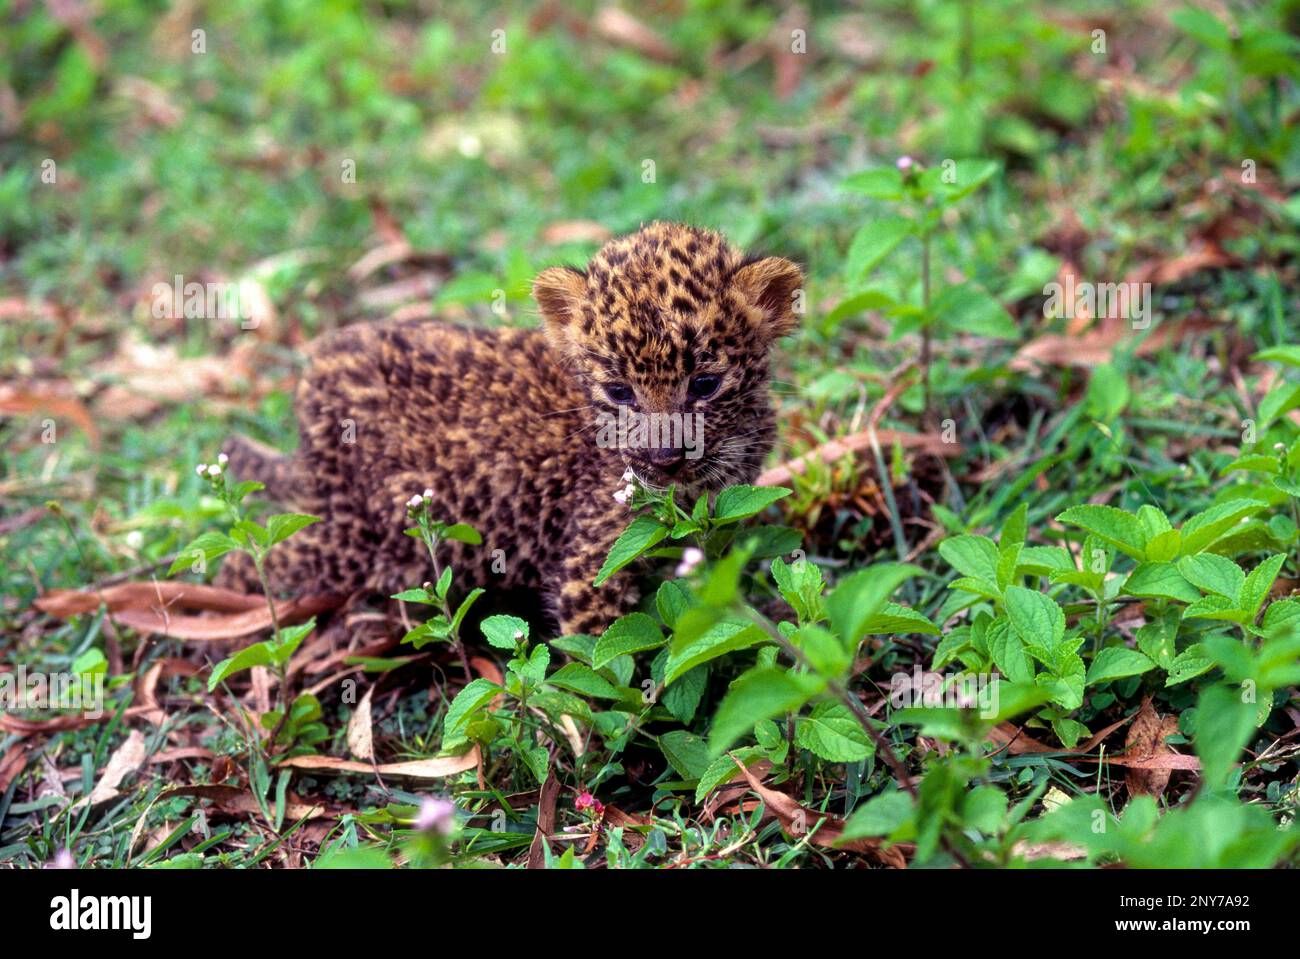 A 20-day-old leopard cub at Bandipur left by its mother in a sugarcane plantation, Karnataka, South India, India, Asia Stock Photo